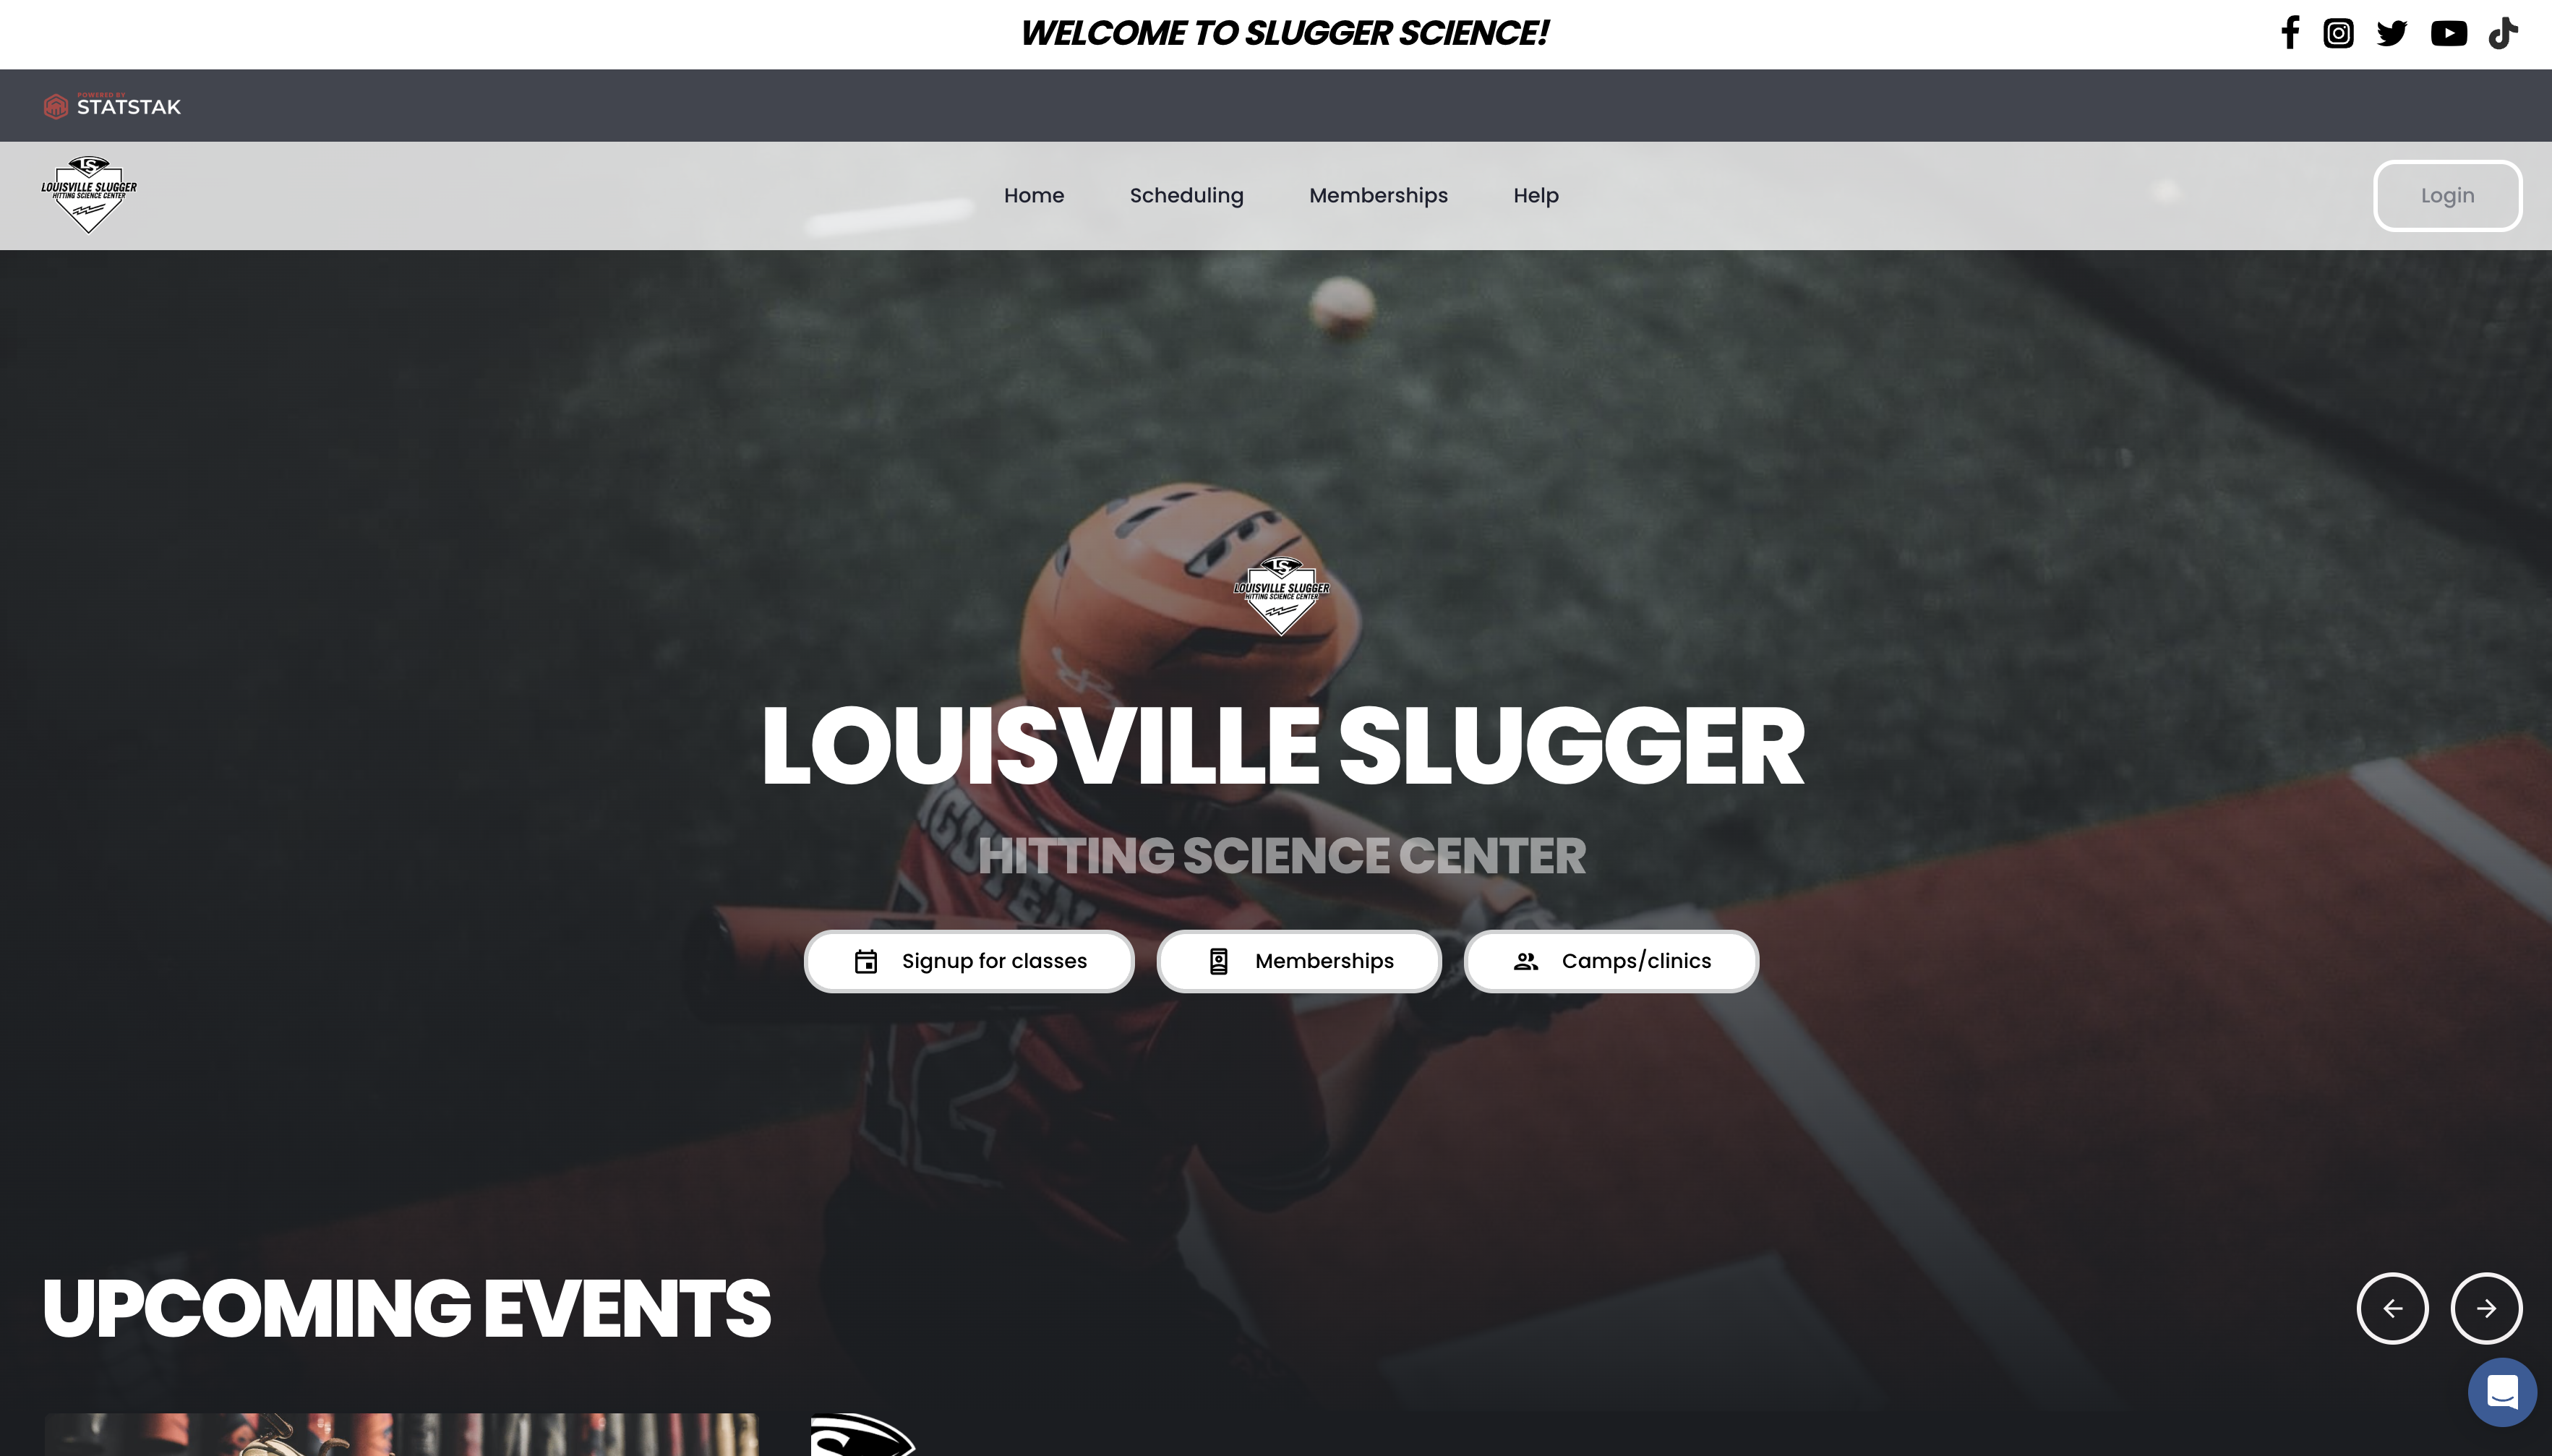 Custom-branded landing pages and app designs used by the most notable brands in the sports world